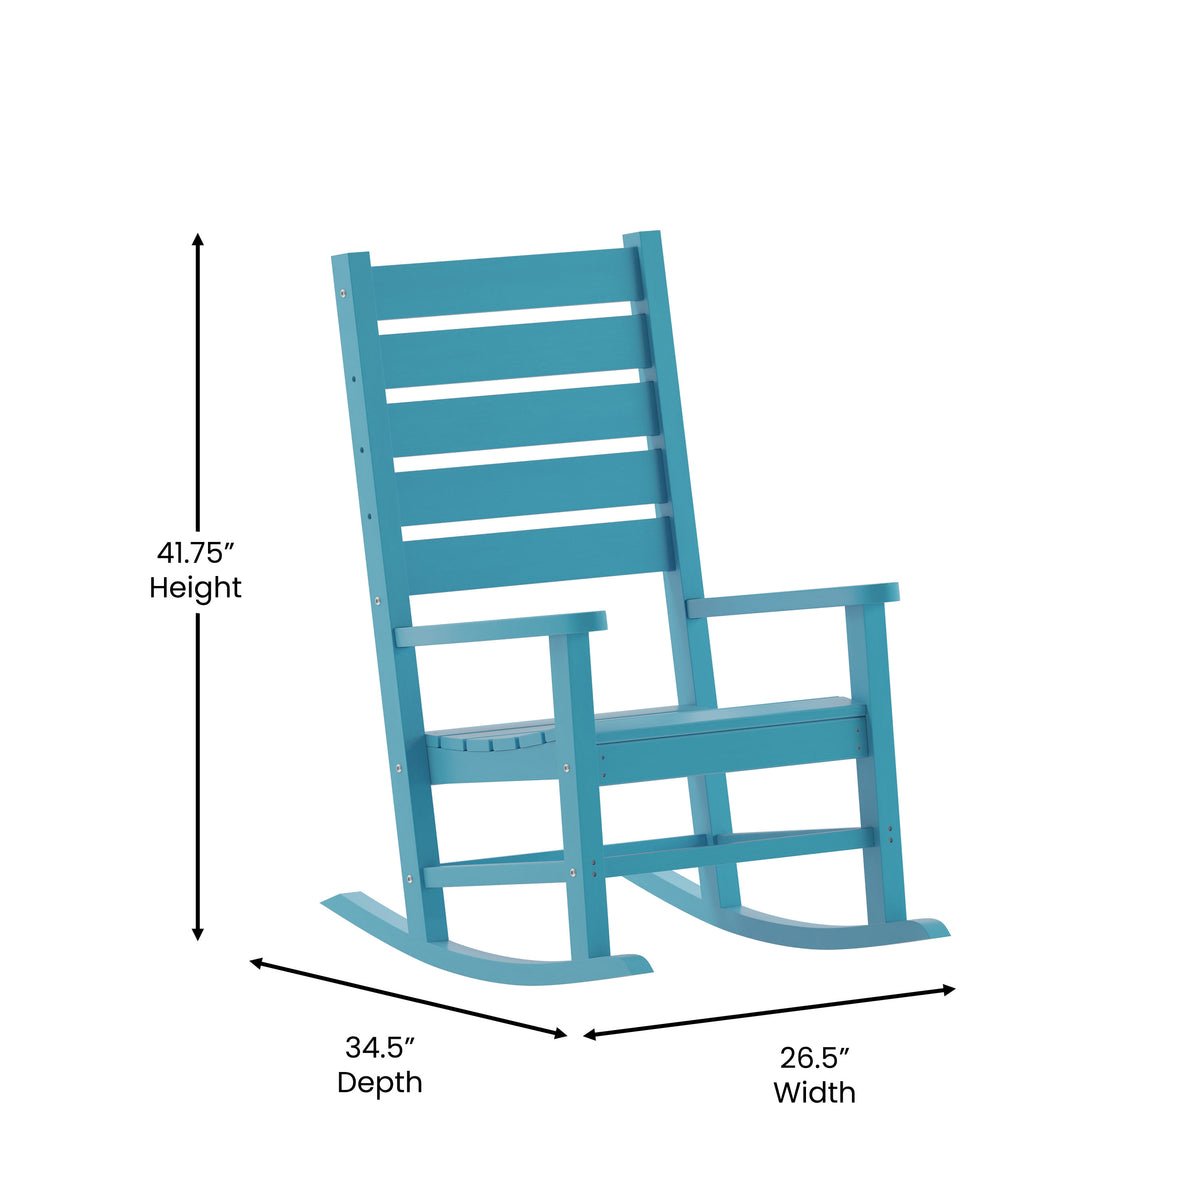 Blue |#| Classic Commercial Grade Outdoor All-Weather HDPE Rocking Chair in Blue